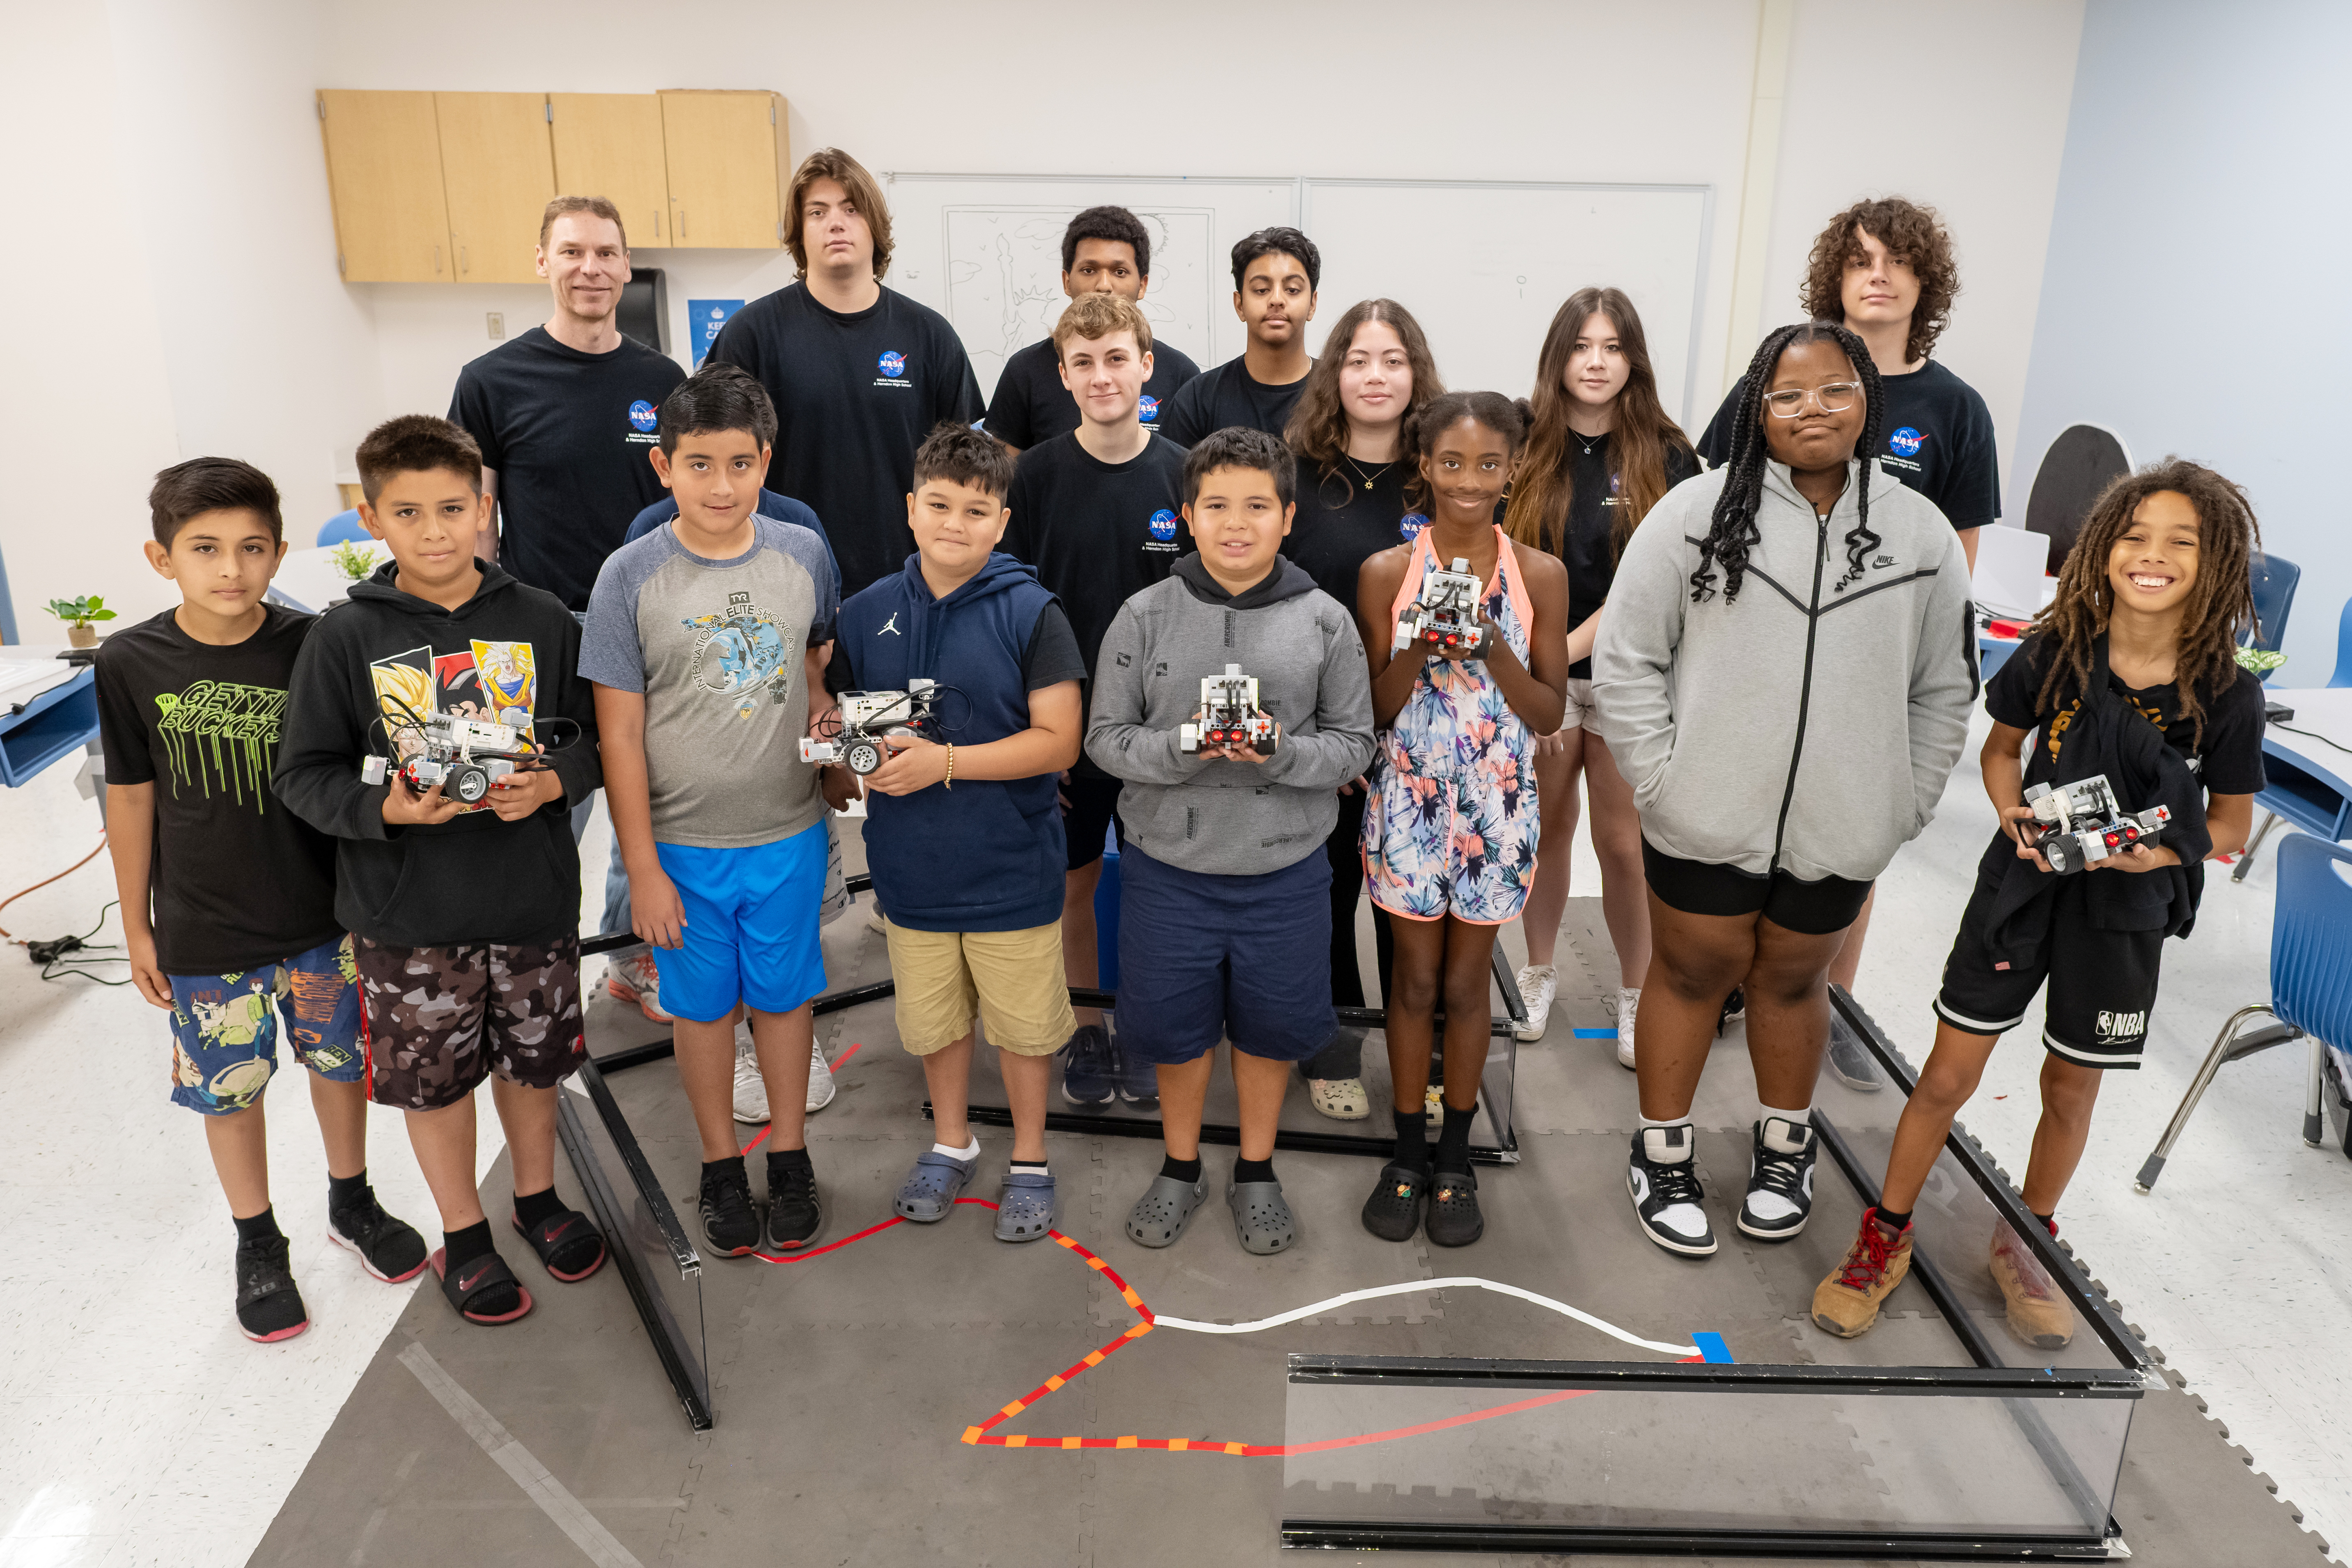 Students and instructors at Clearview Elementary School's robotics camp pose for a photo. Standing in a group, the eight Clearview students stand at front, smiling and holding their LEGO robots. Volunteer instructors, in matching black shirts bearing the NASA logo, stand in back. 